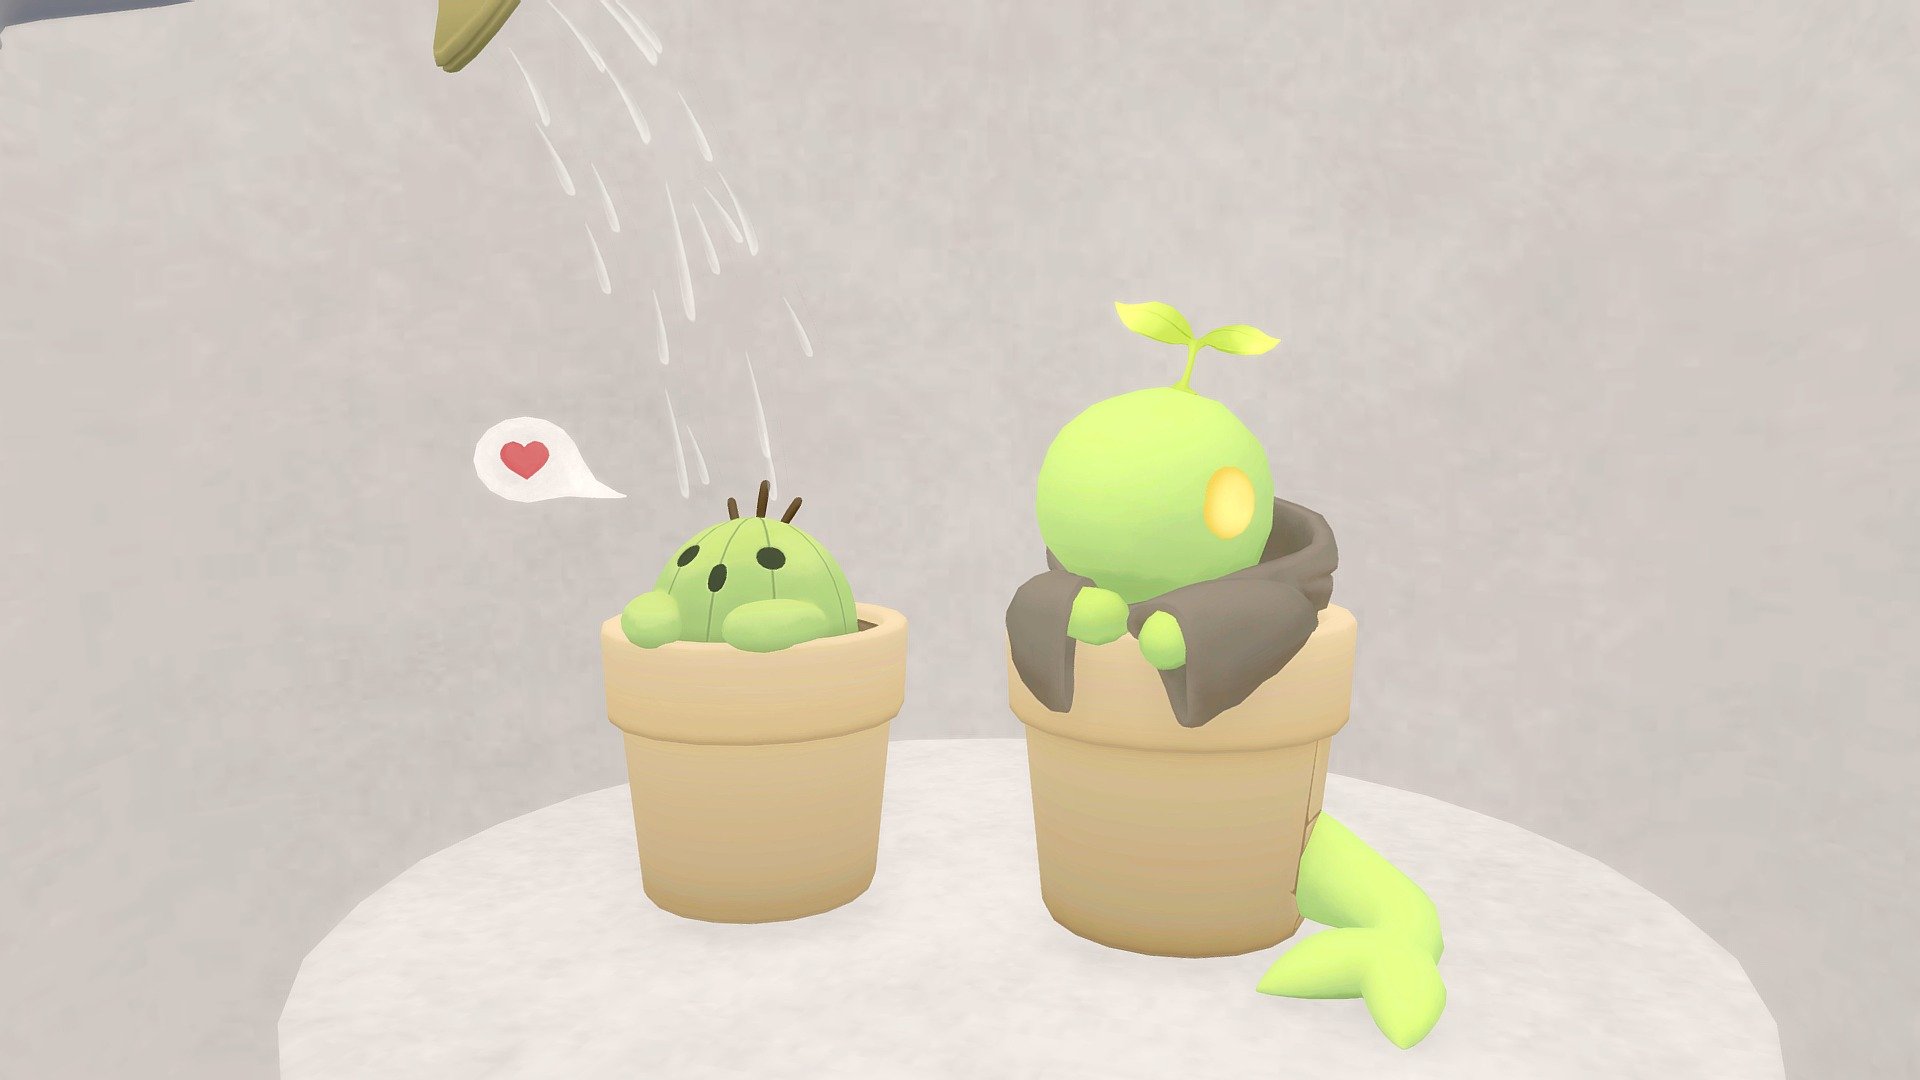 &hellip;but one of these plants is not like the other! The tonberry is a good boi, he deserves the delicious water too. 

Fanart based on せり &lsquo;s illustration: 



Done with Blender and Substance Painter - Take care of your plants - 3D model by WolvenArts 3d model